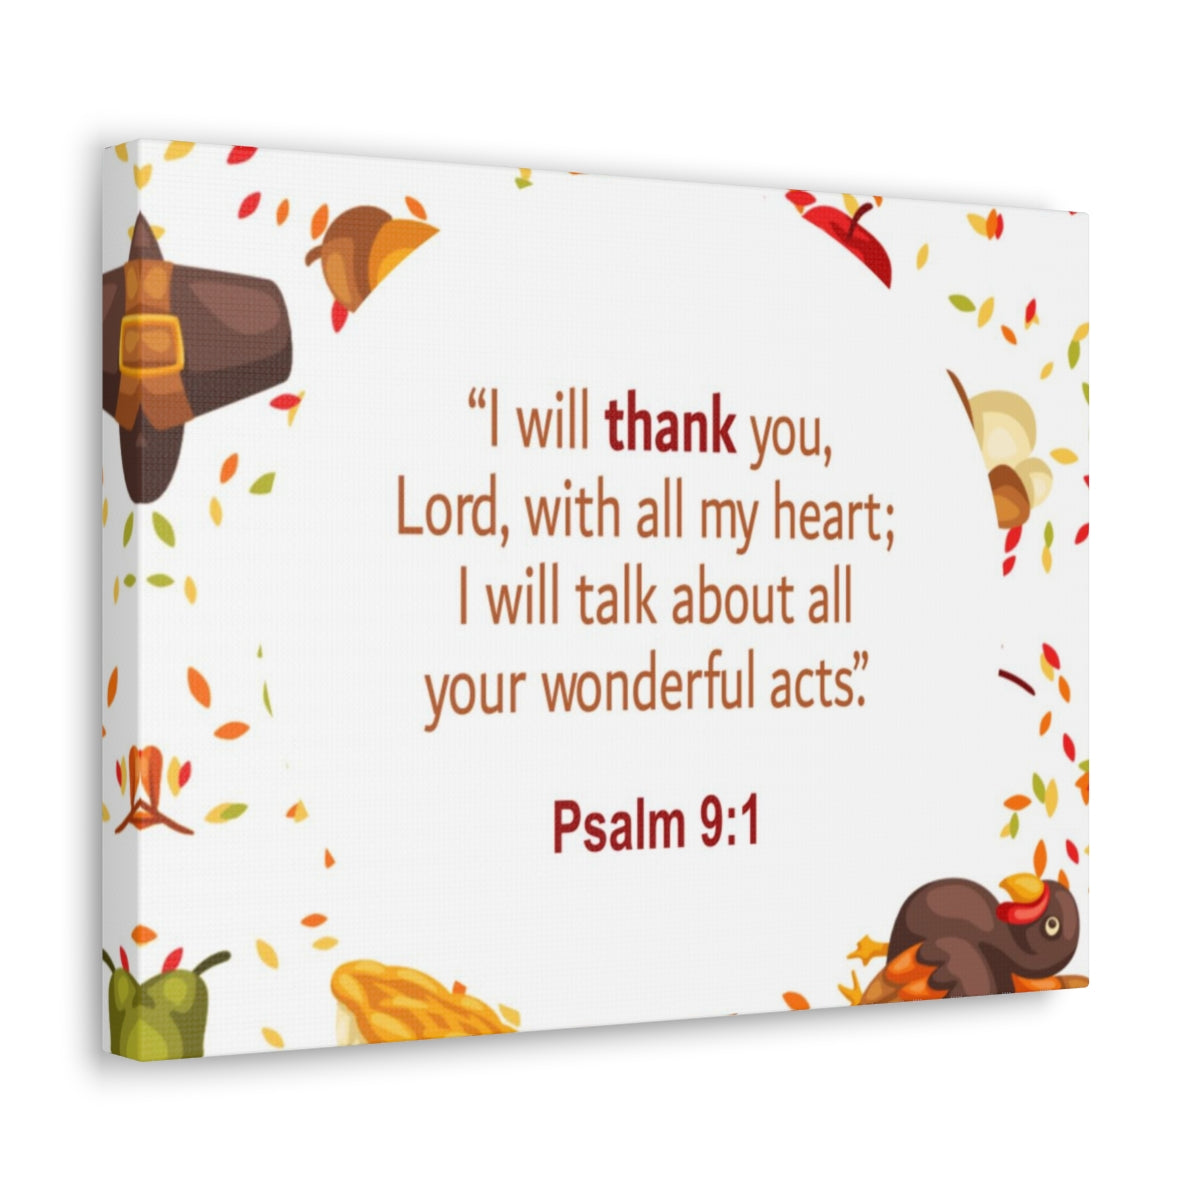 Scripture Walls With All Your Heart Trello Mark 9:23 Bible Verse